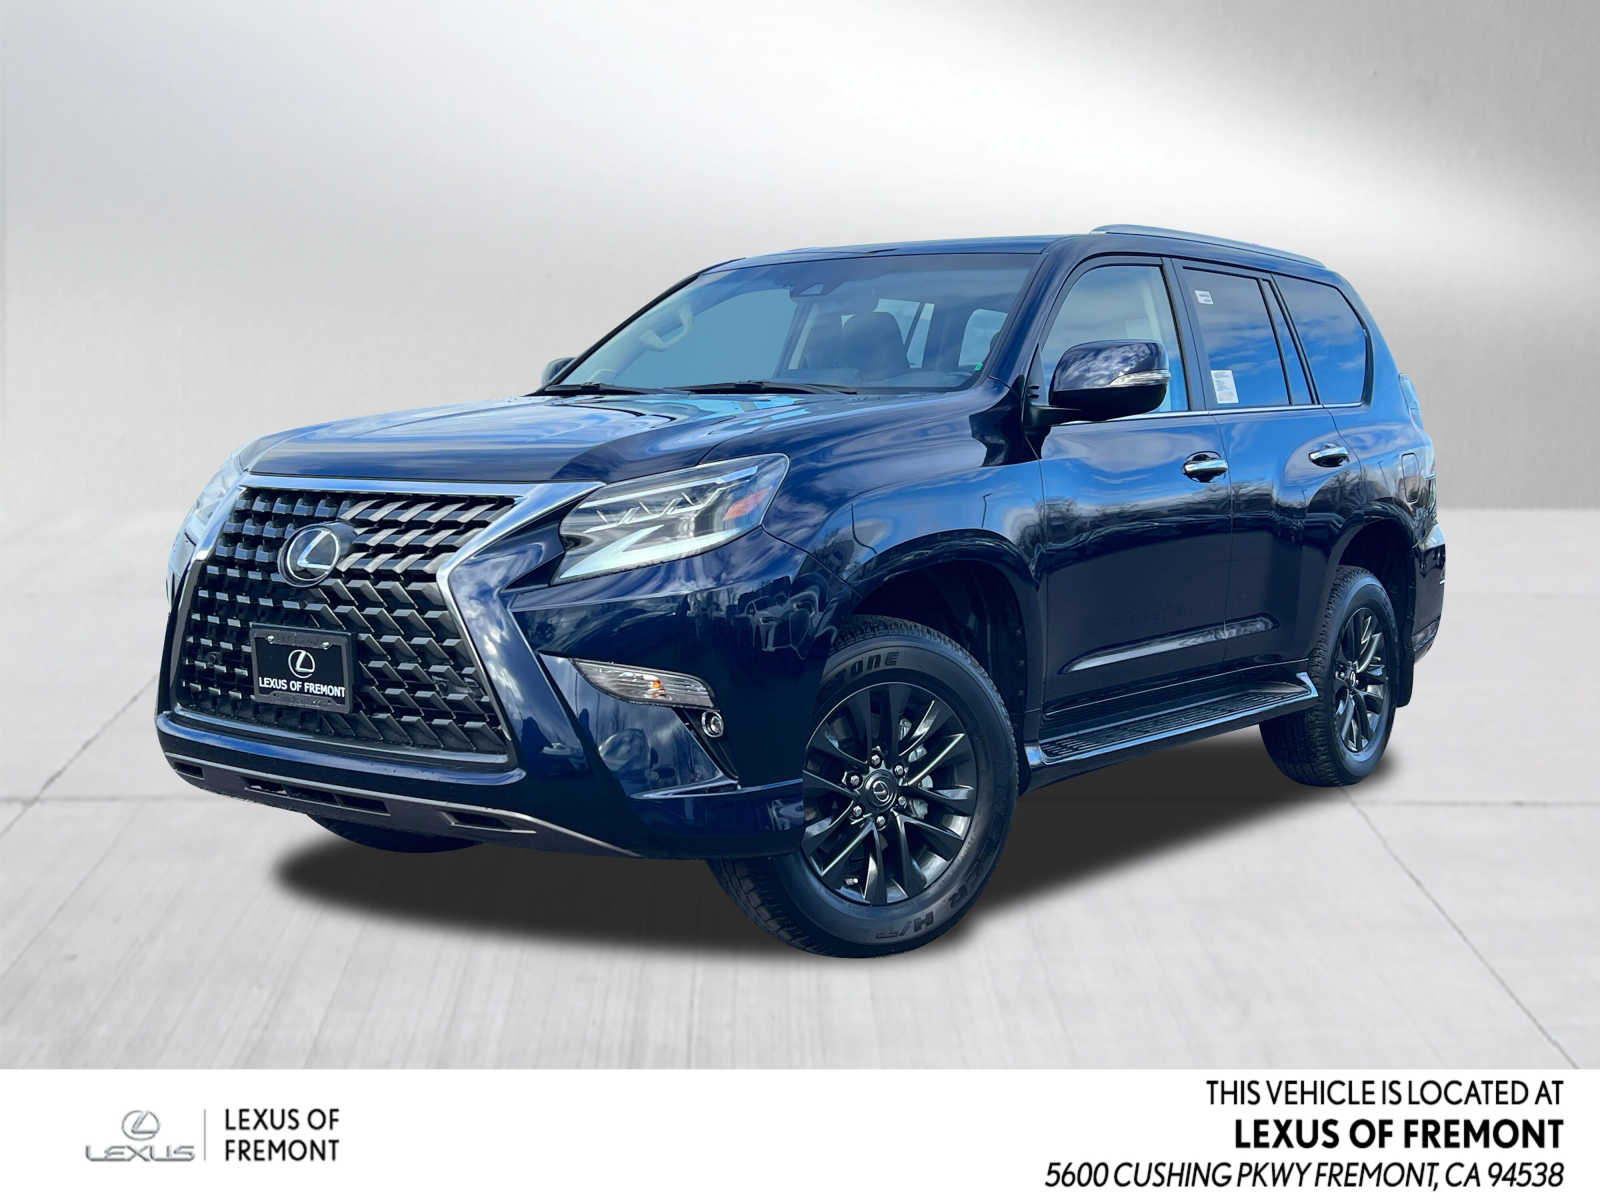 Vehicle Stability Control System in the 2010 MY Lexus GX 460 SUV